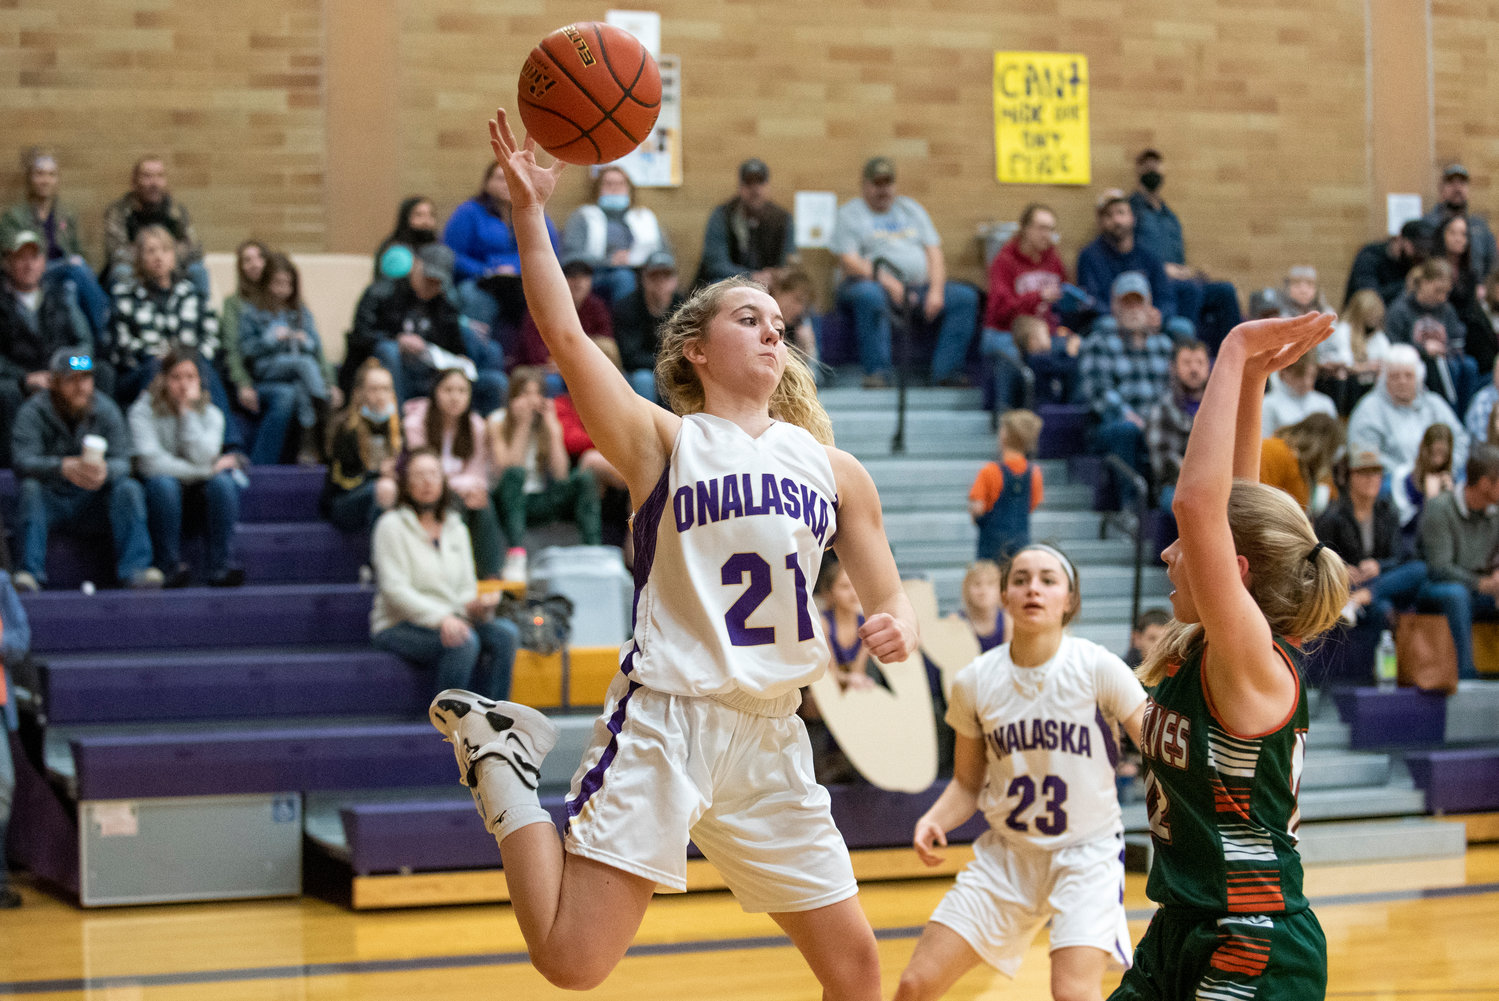 Onalaska's Callie Lawrence (21) saves a ball from going out of bounds during a playoff game at home against Morton-White Pass on Feb. 5.